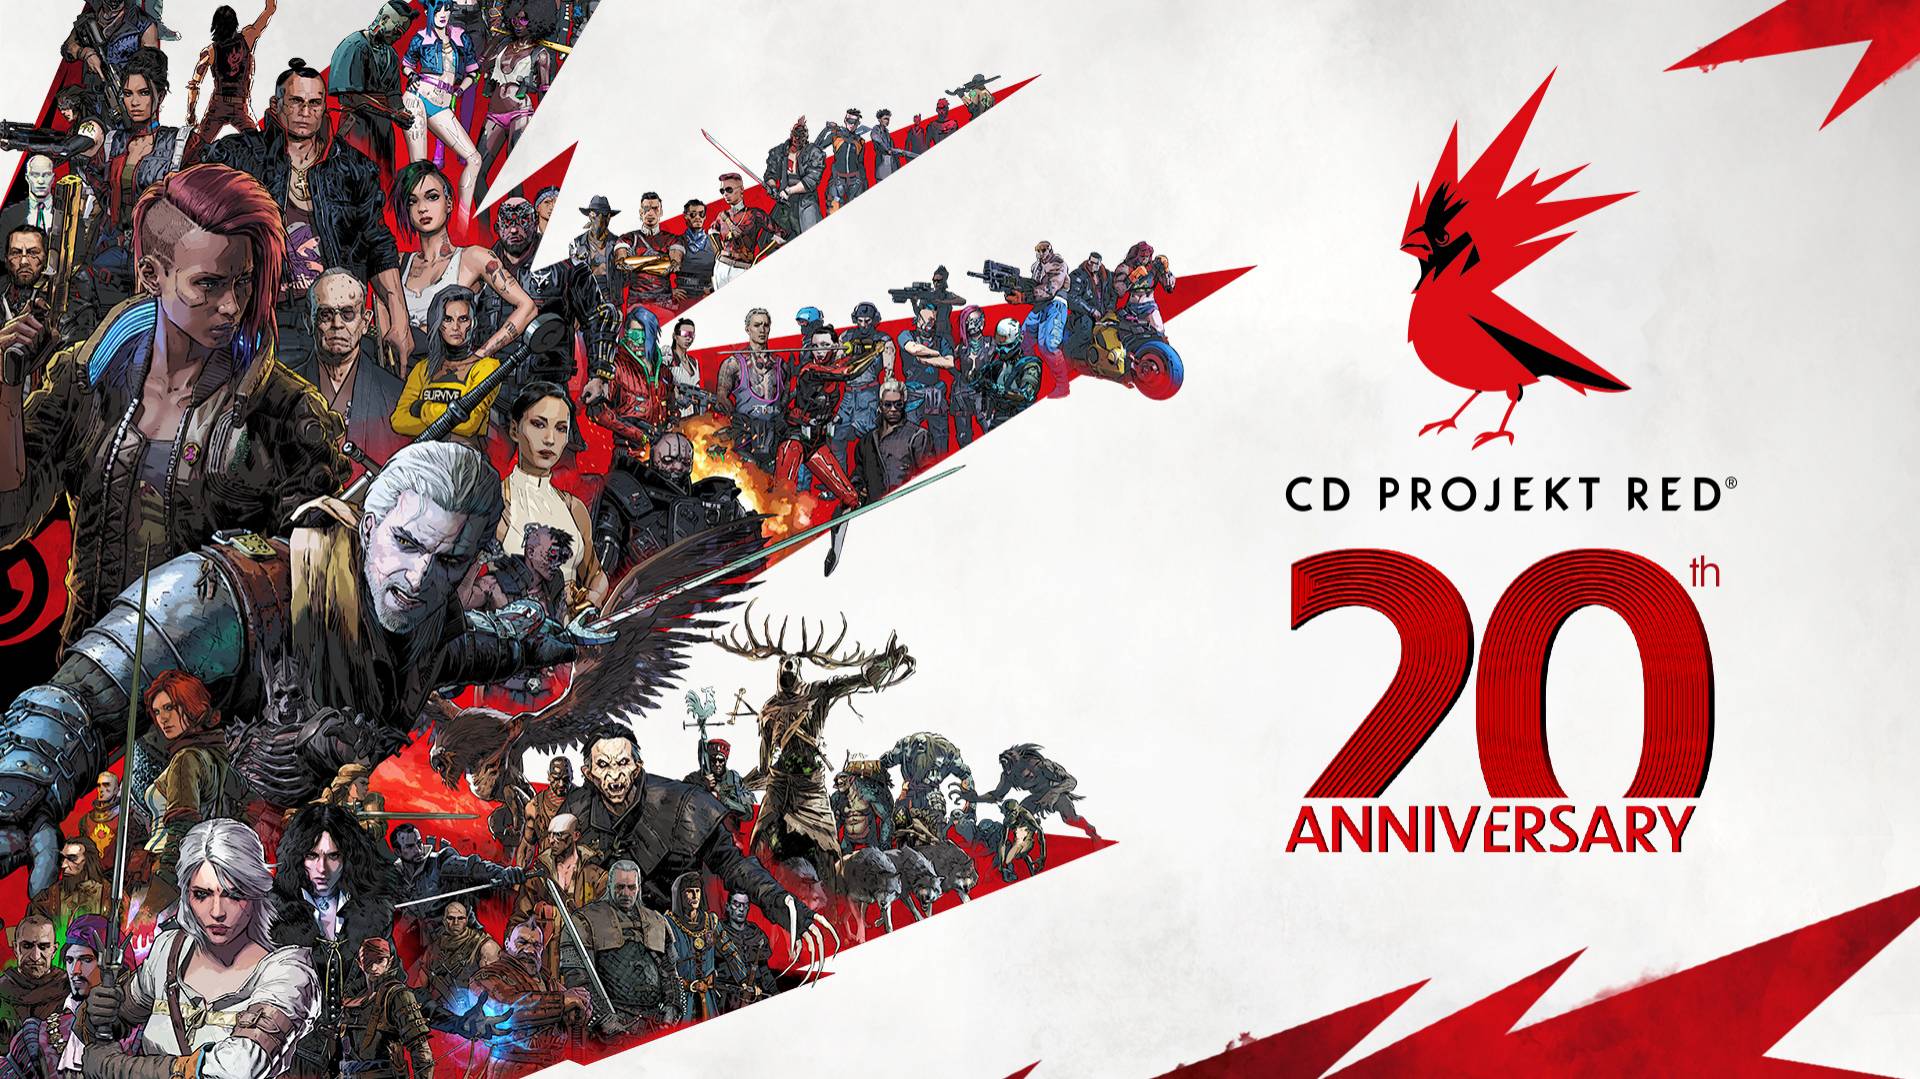 Brudgom Indirekte screech 20 years of CD PROJEKT RED! - Cyberpunk 2077 — from the creators of The  Witcher 3: Wild Hunt